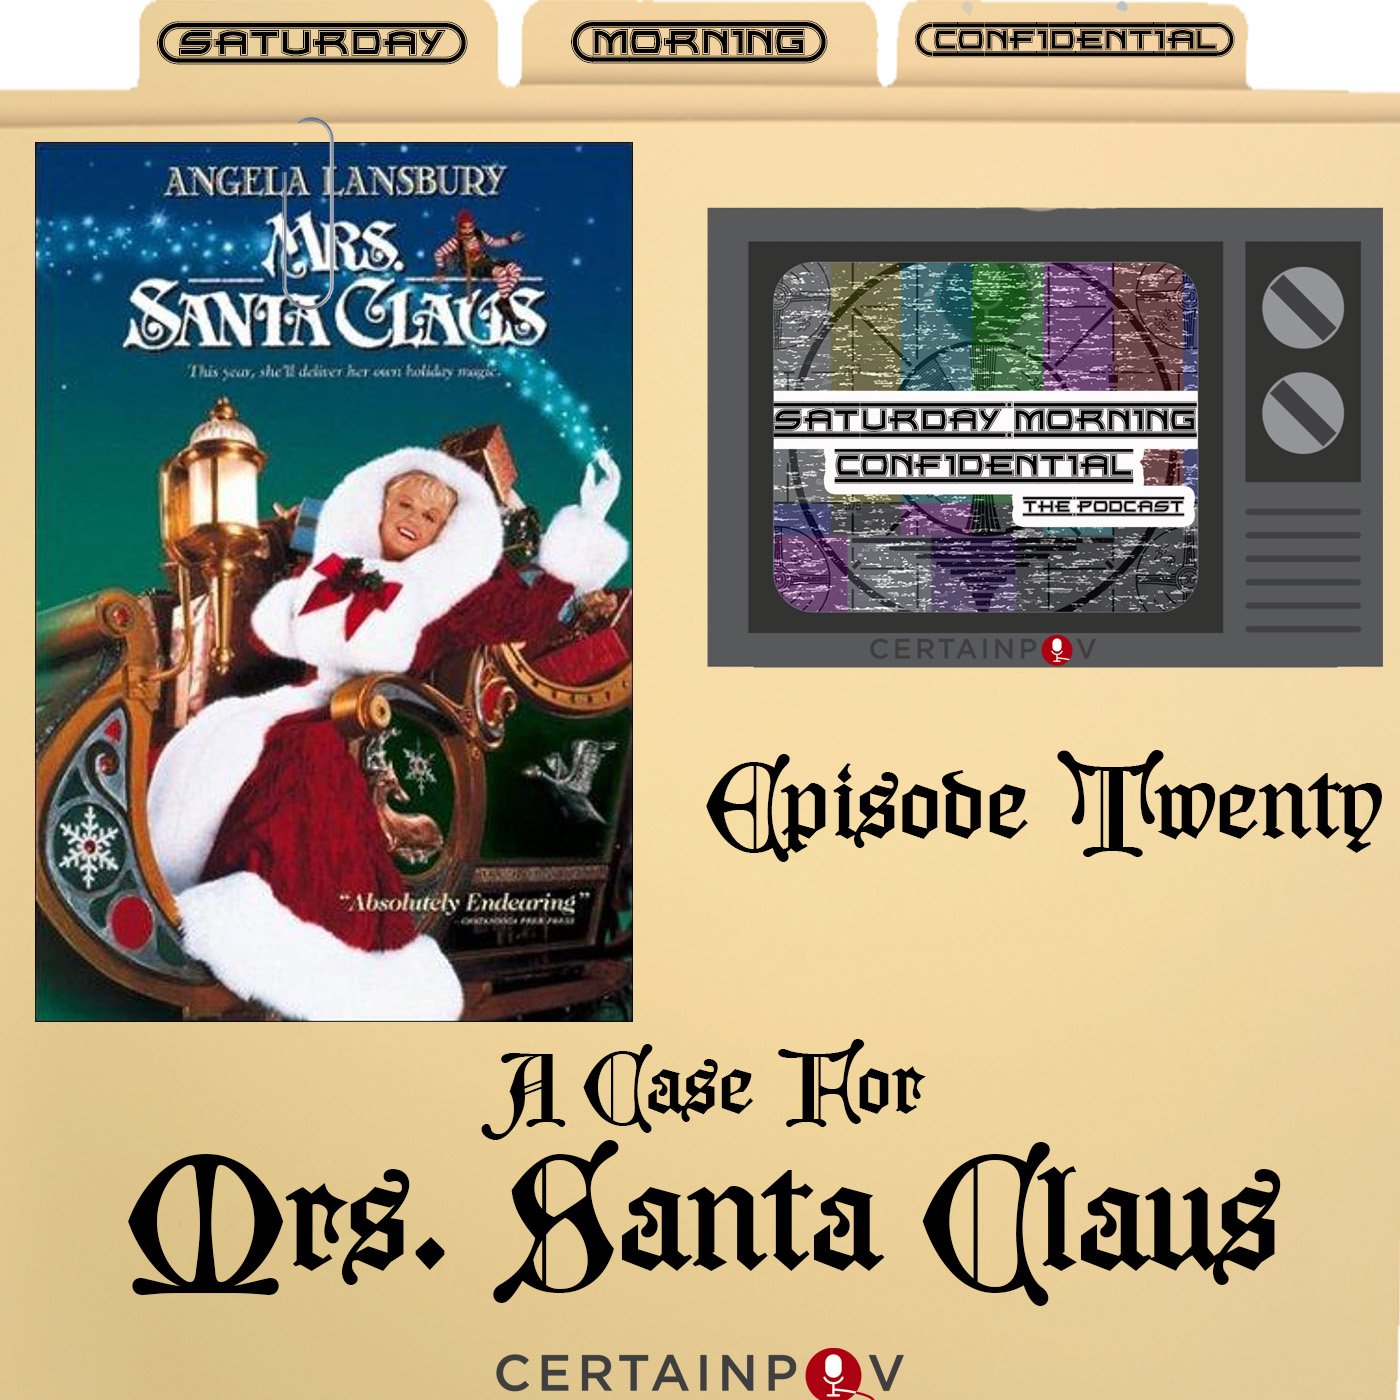 A CASE FOR THE 1996 HALLMARK HOLIDAY CLASSIC MRS. SANTA CLAUS 